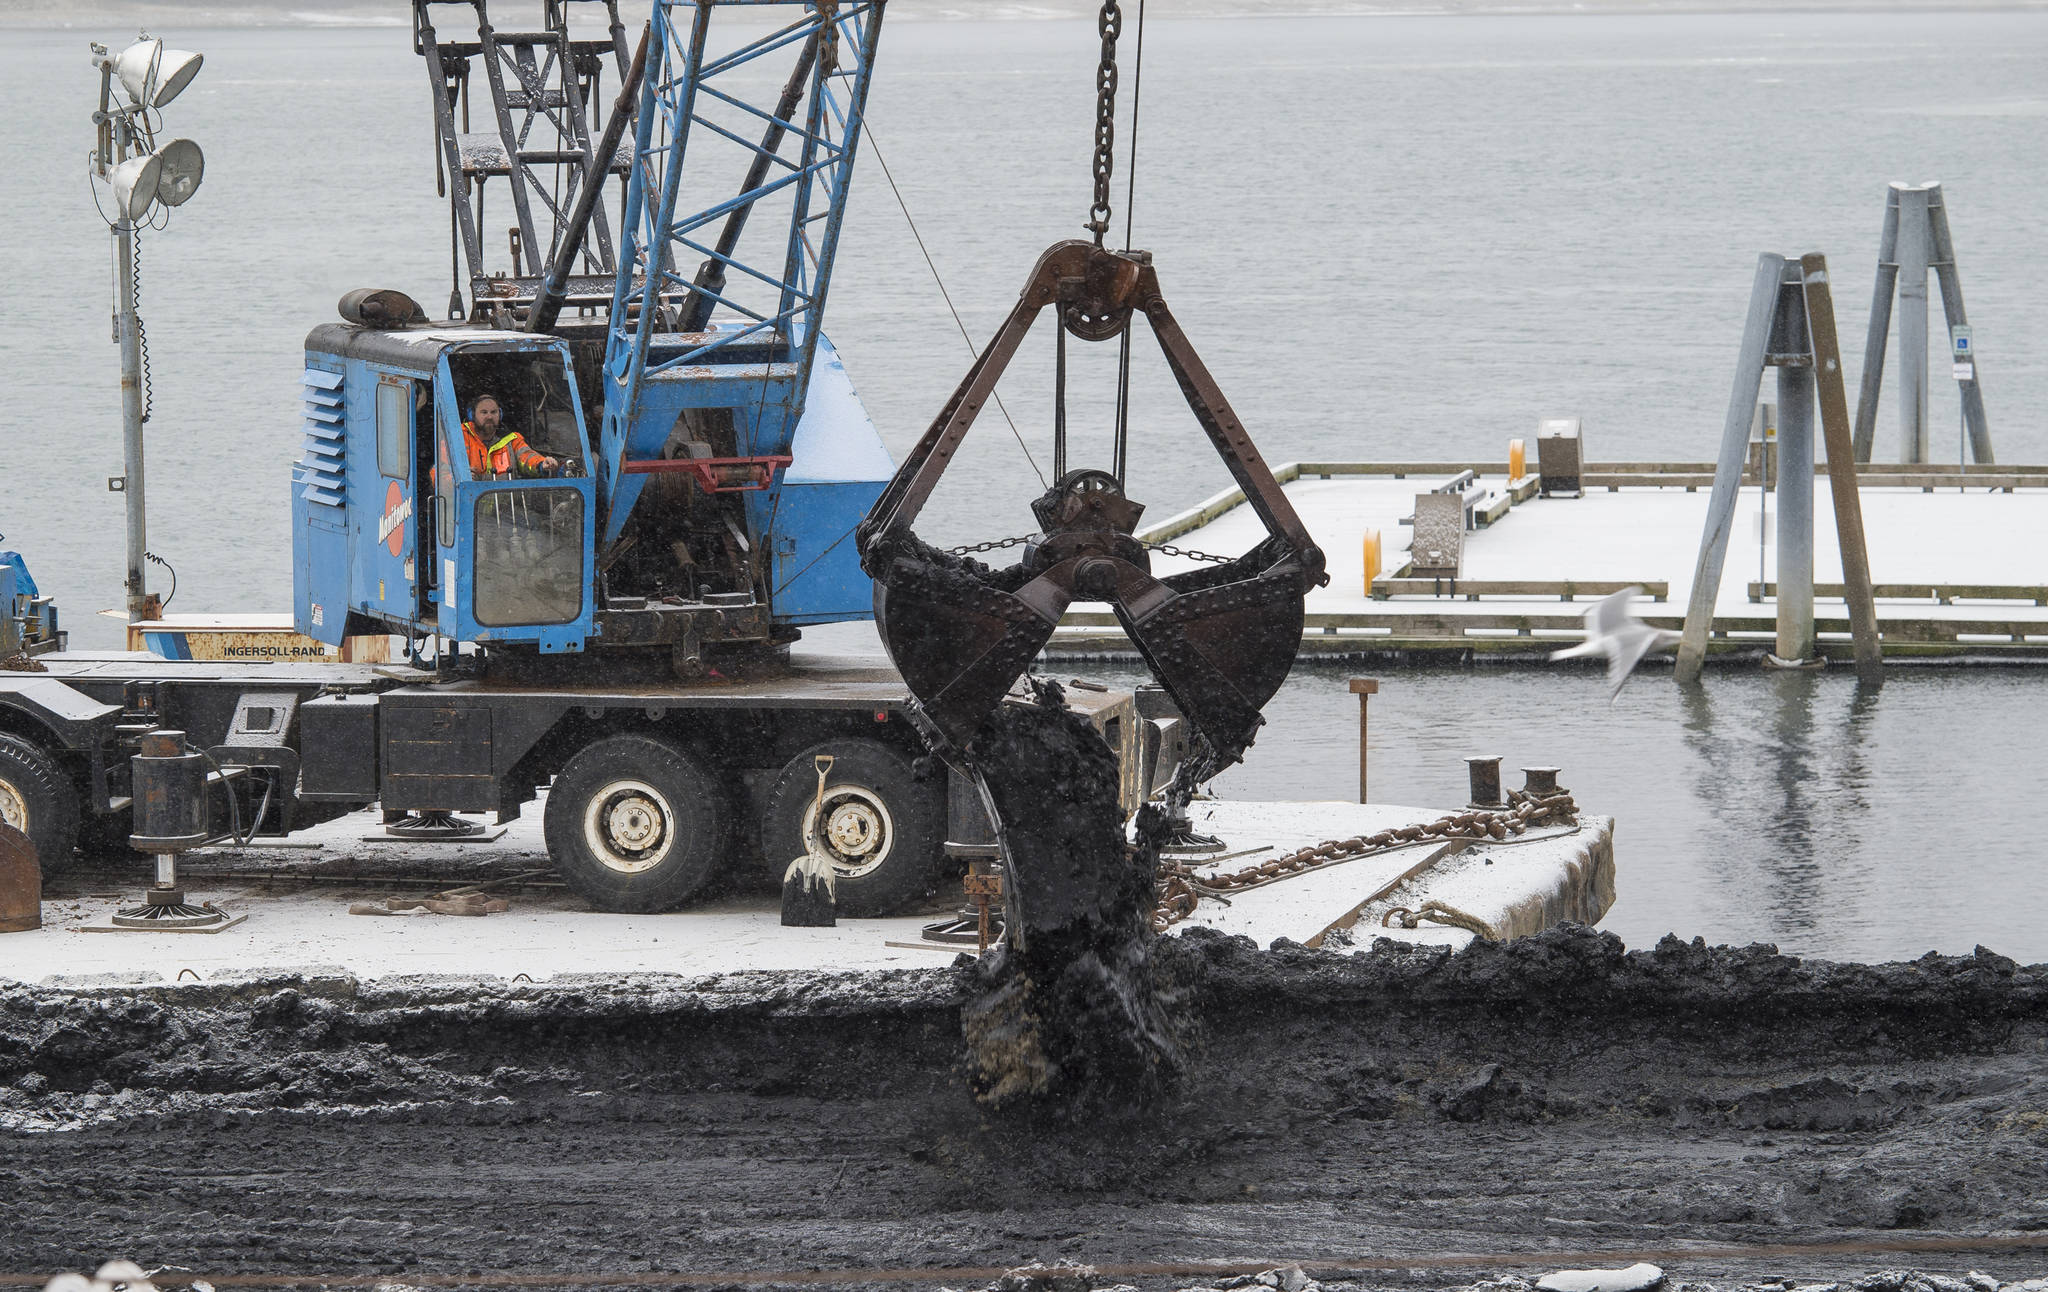 Dredging is taking place as the DIPAC Macaulay Salmon Hatchery on Friday, Jan. 12, 2018, to make room for salmon rearing pens. (Michael Penn | Juneau Empire)